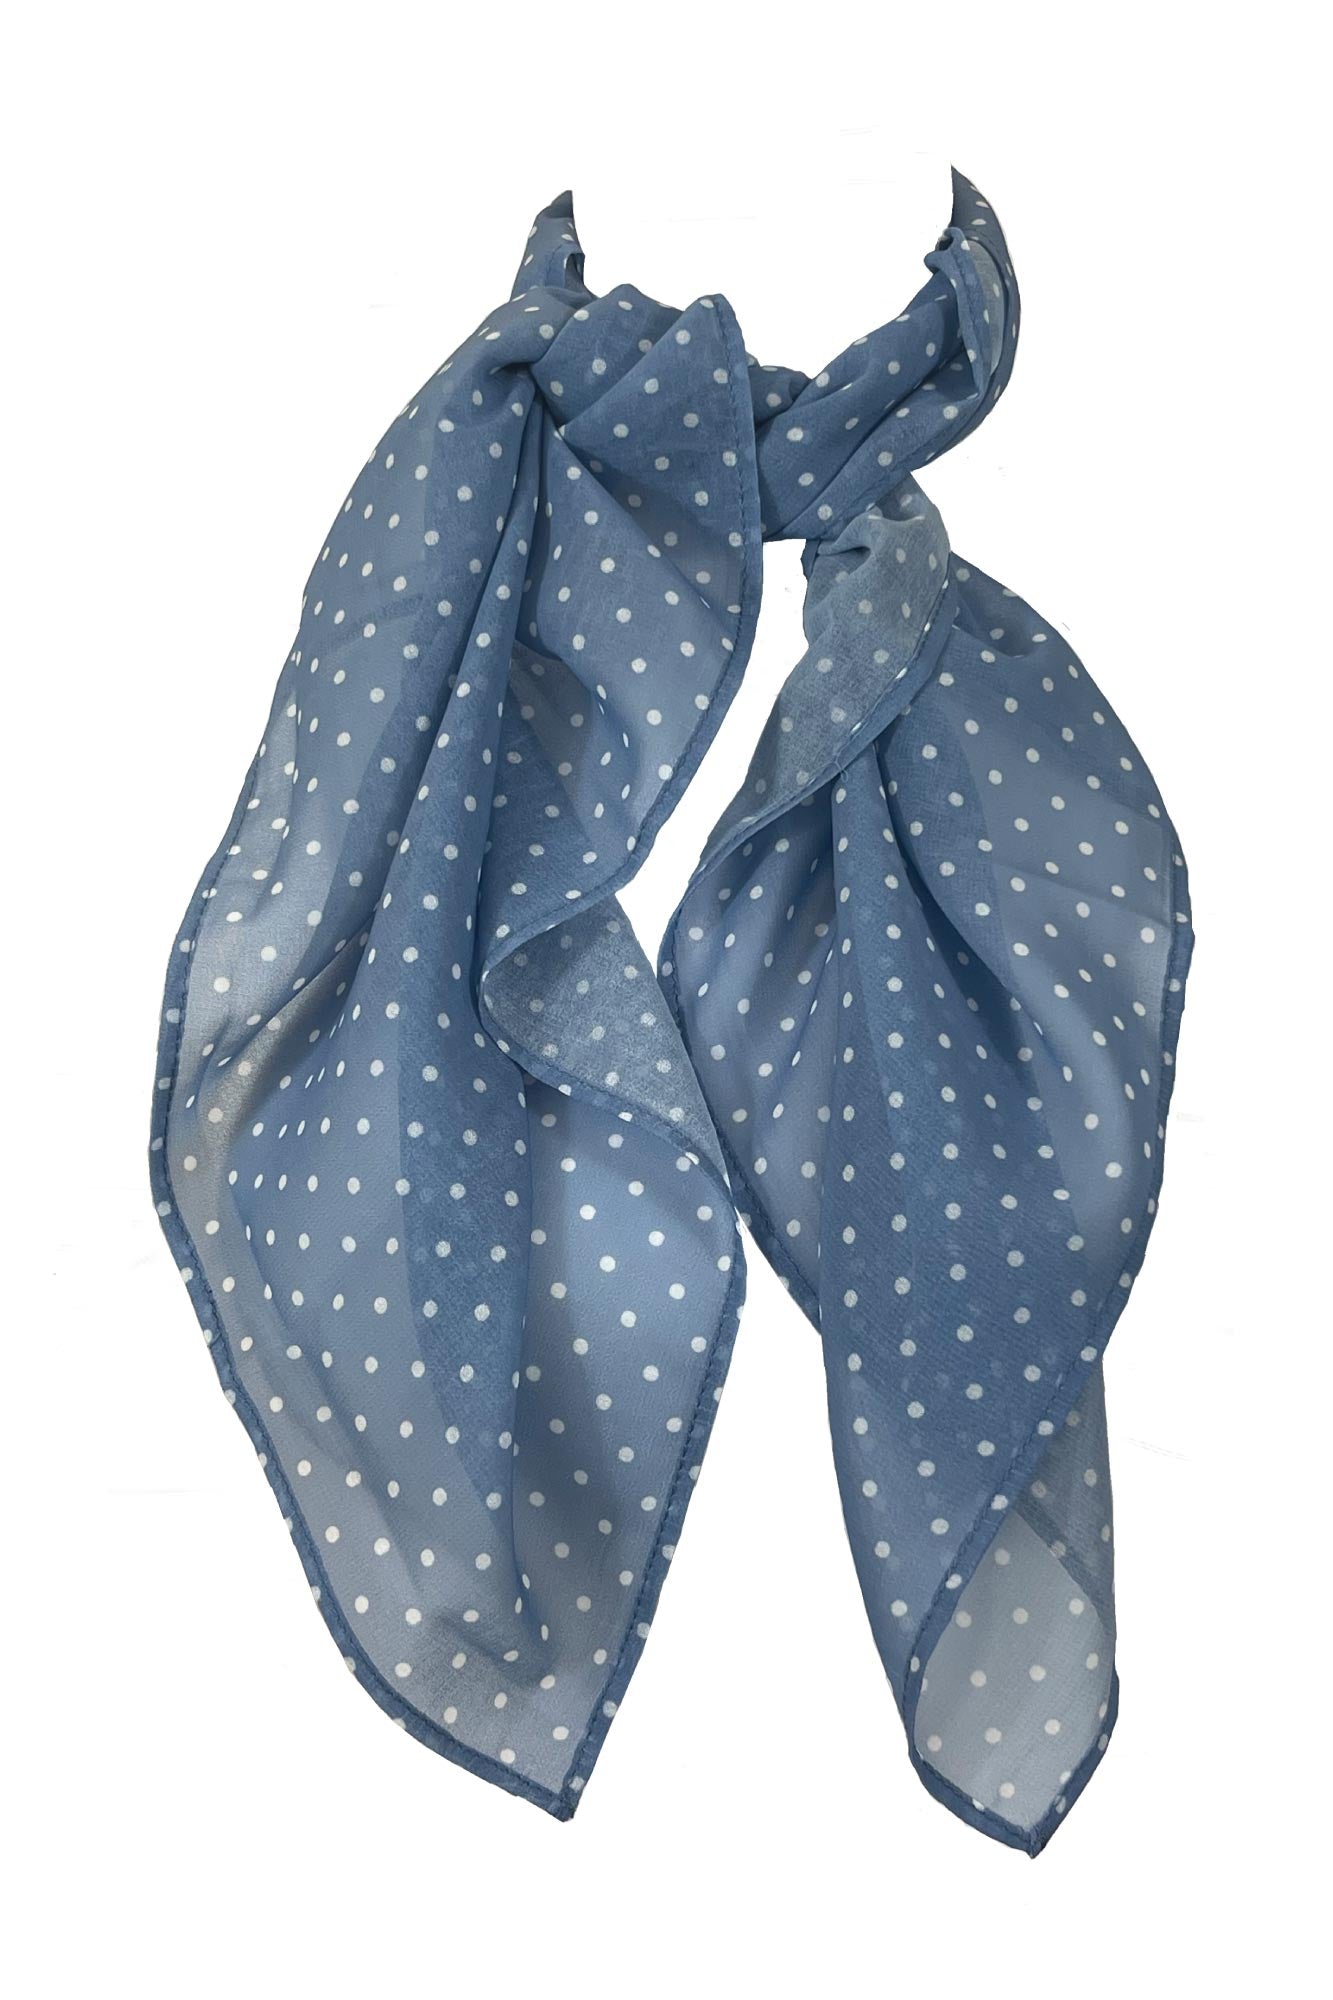 Scarf in Blue with White Polka Dots